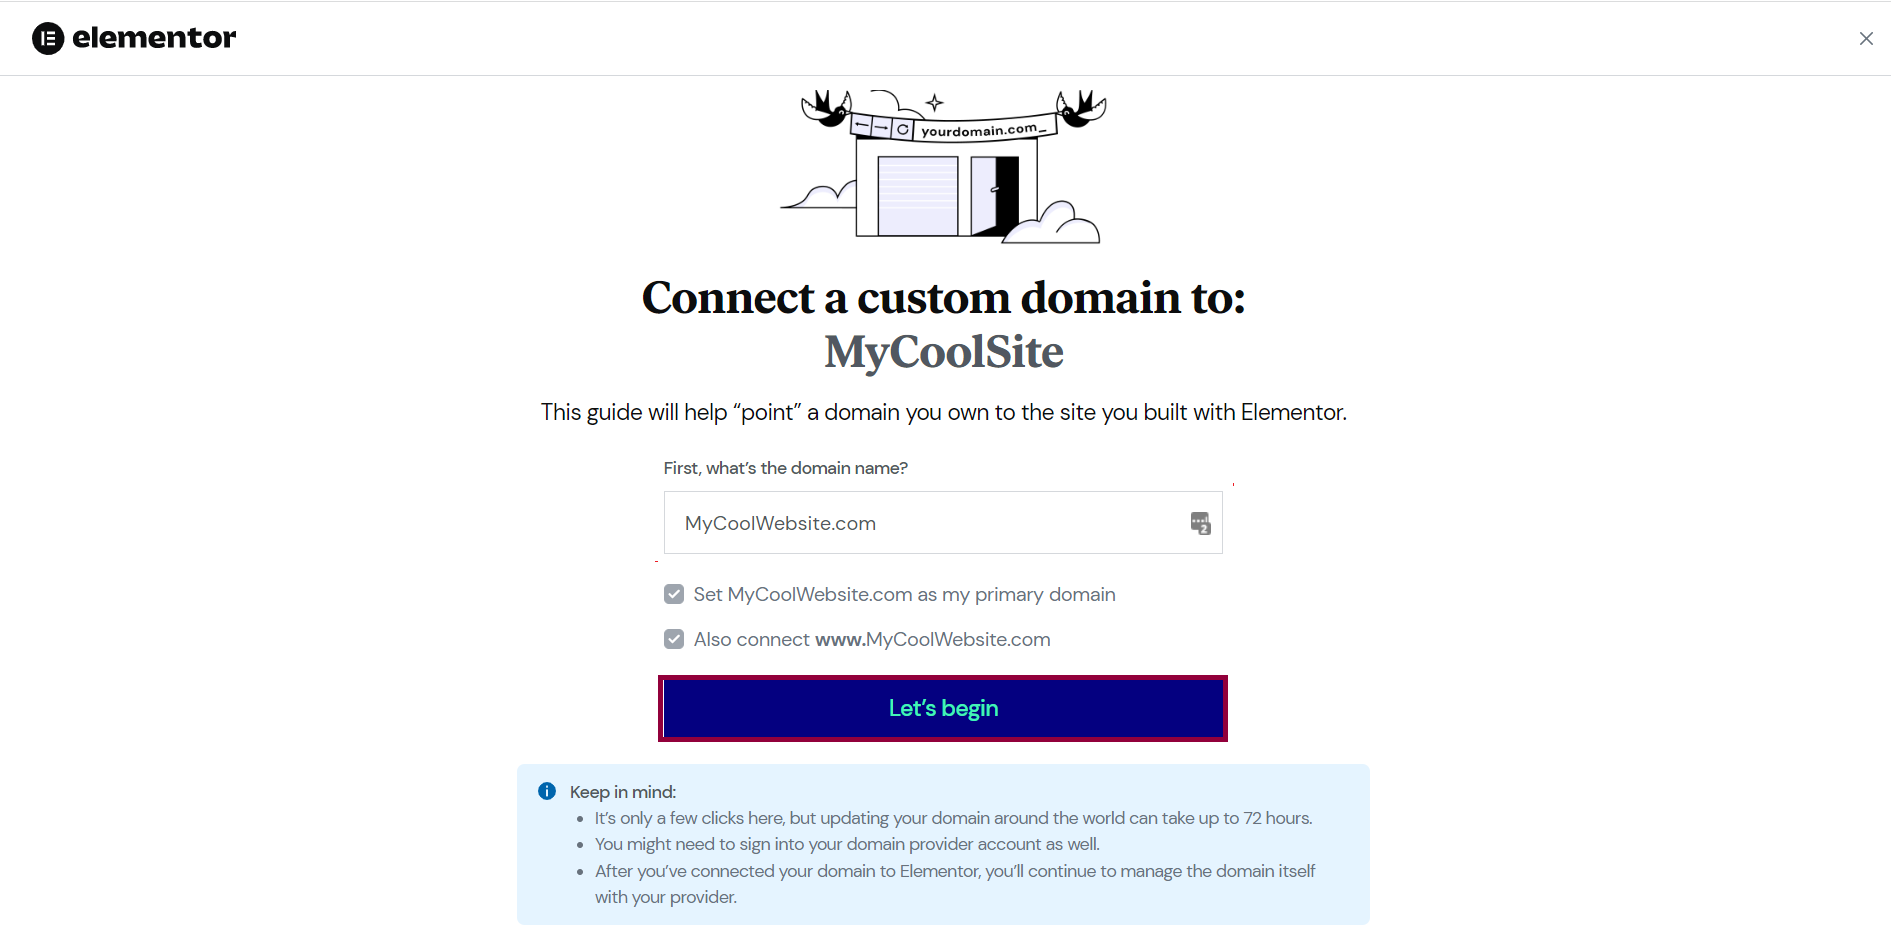 The connect domain window with "Let's Begin" outlined